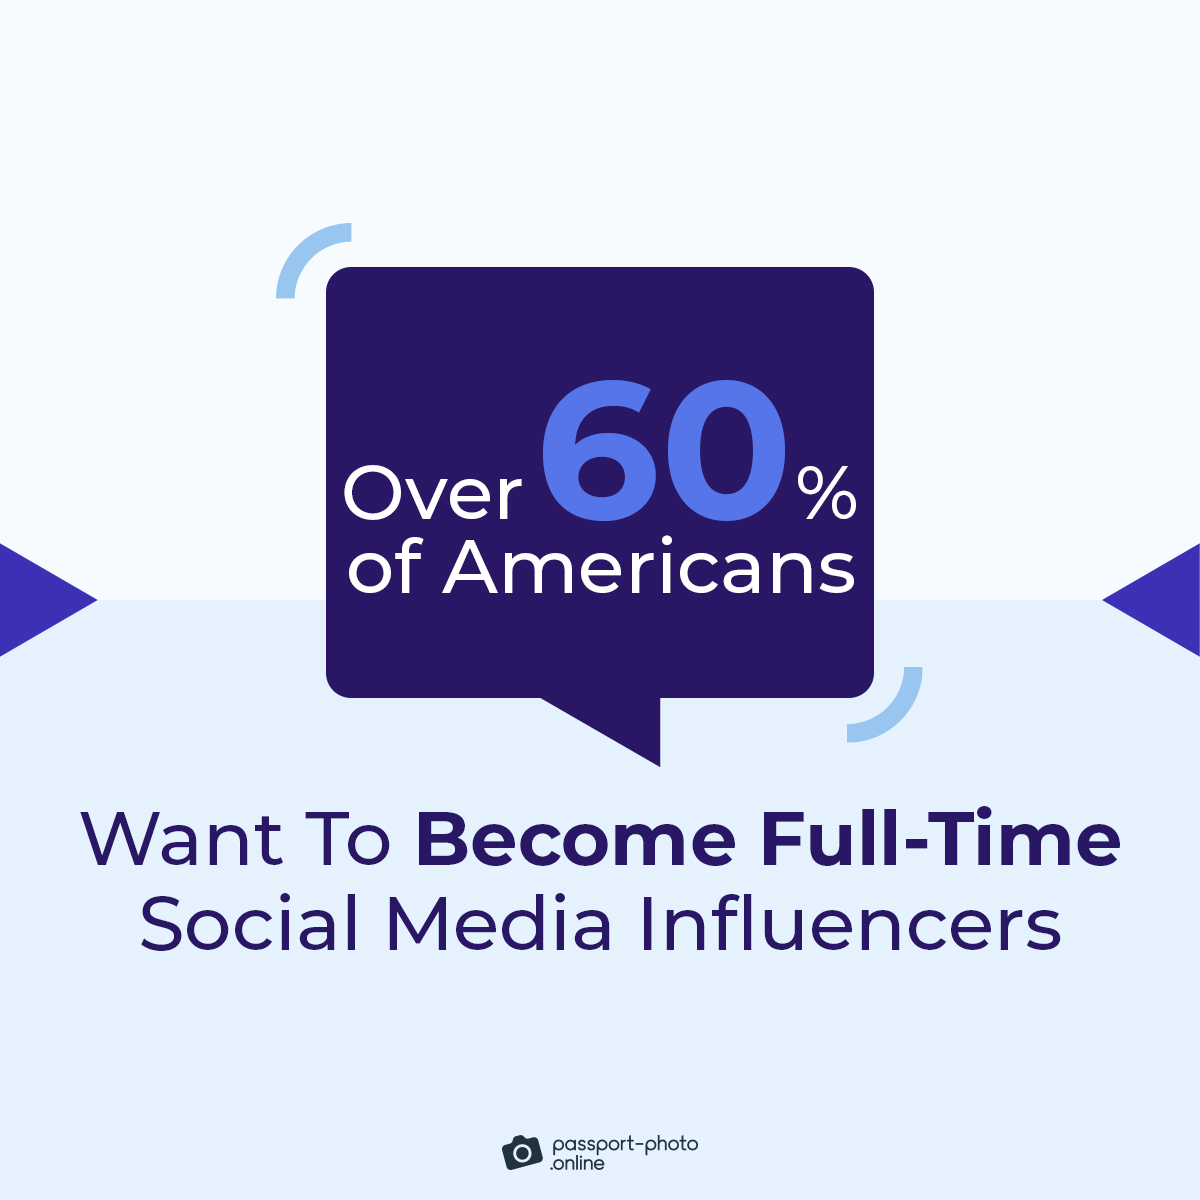 over 60% of people want to become full-time social media influencers